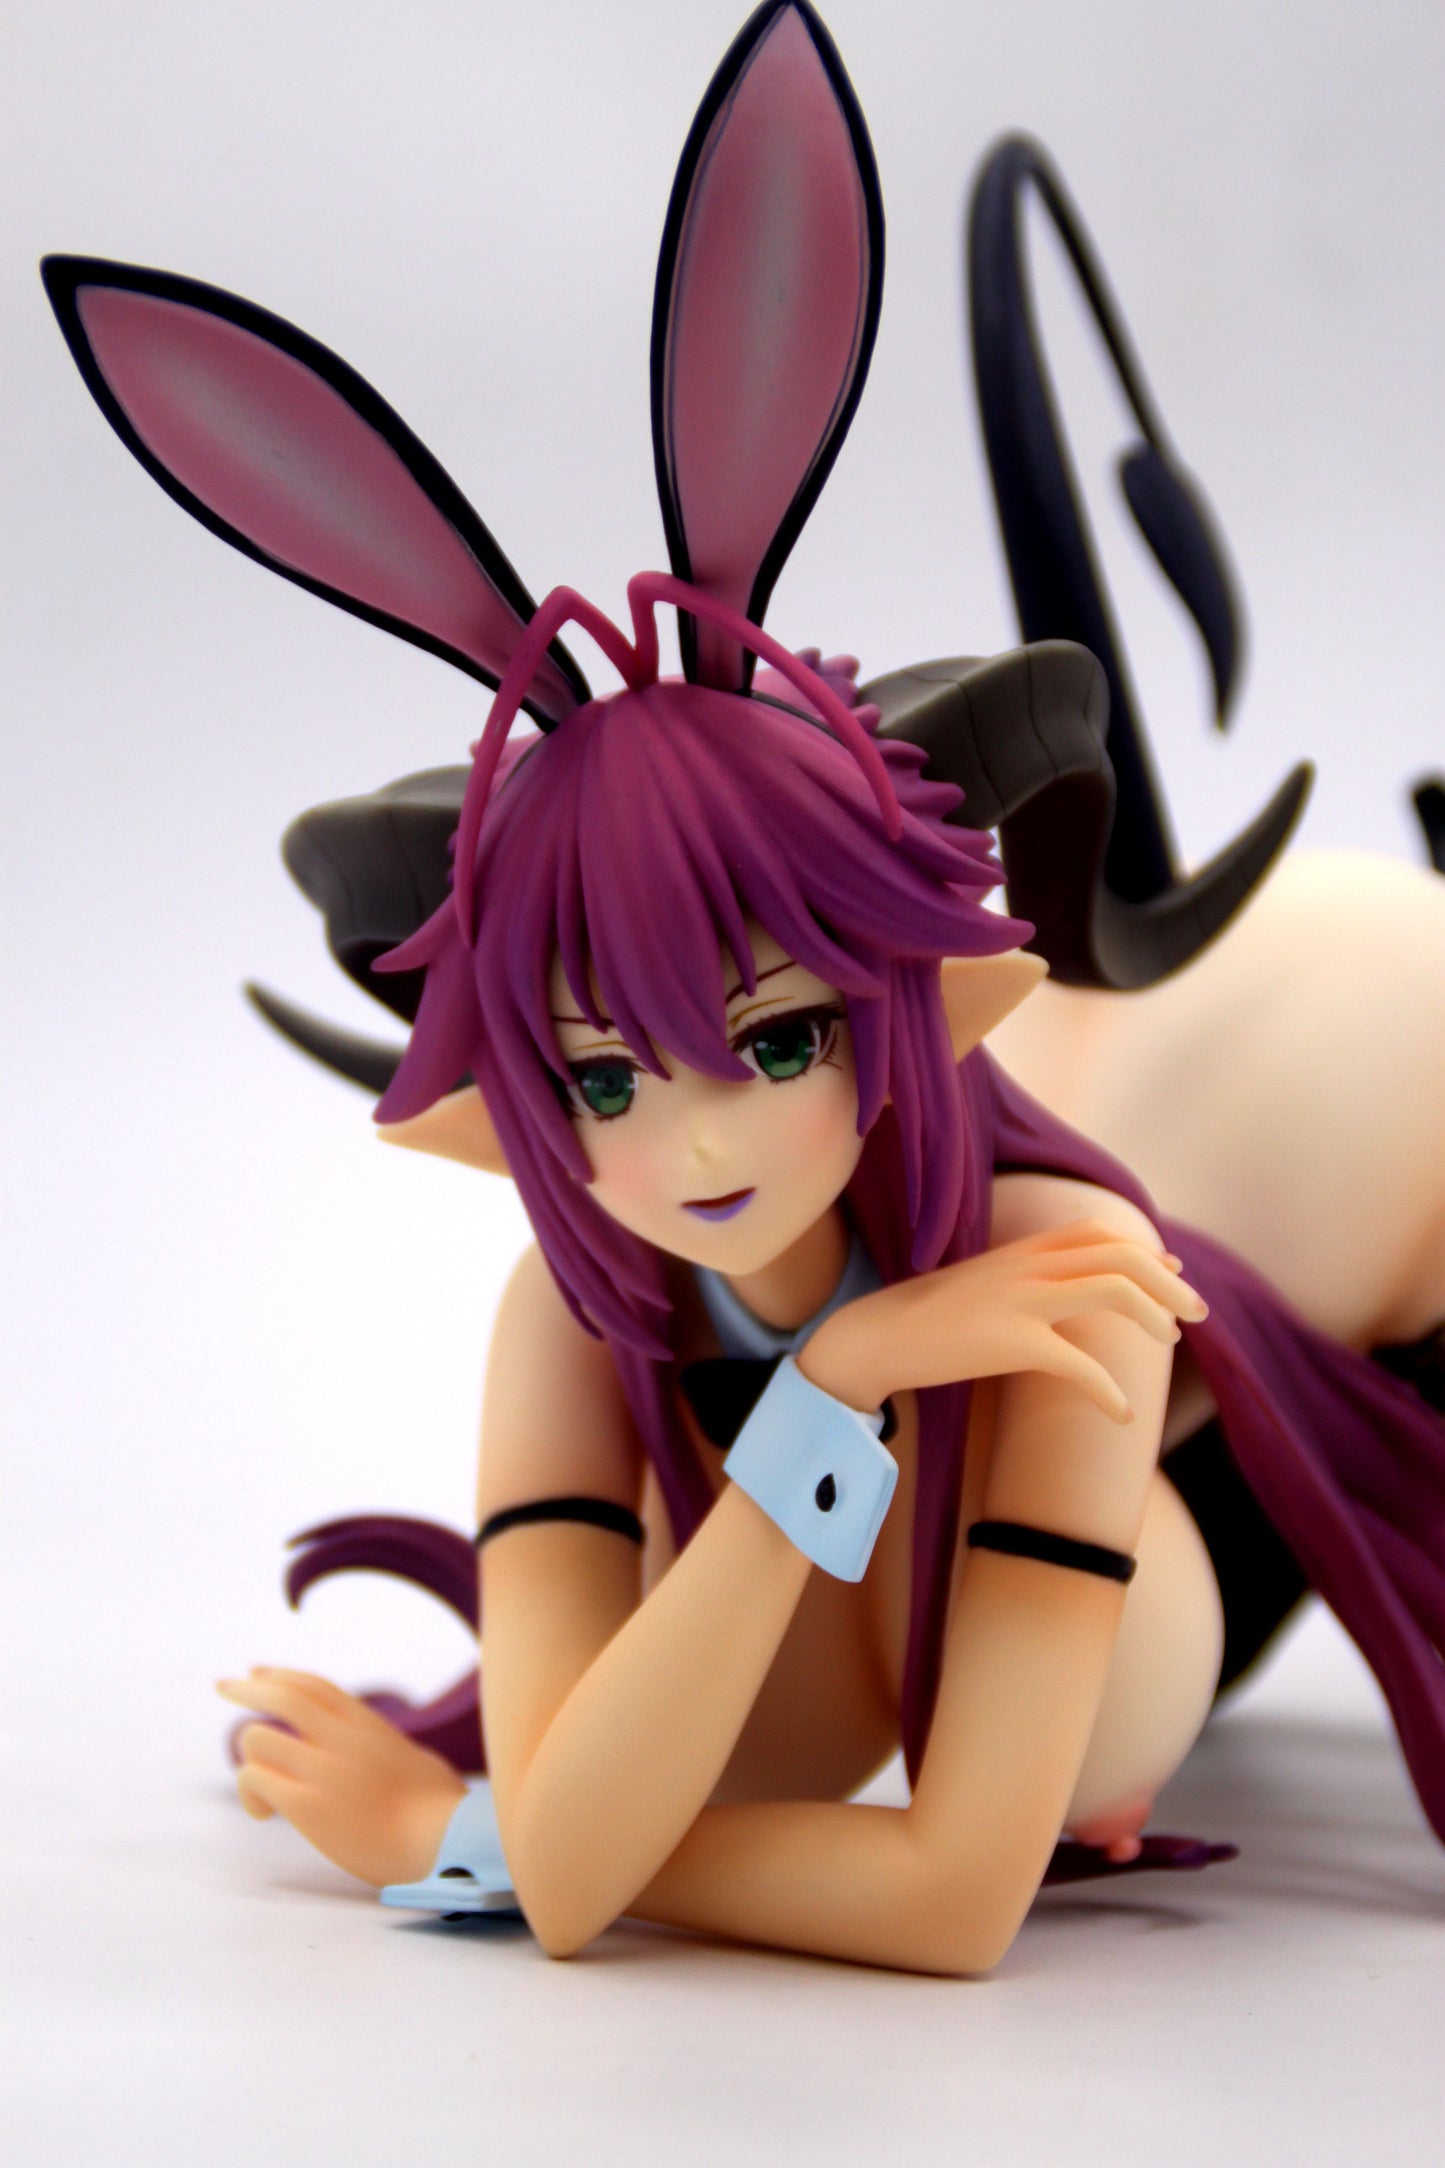 The Seven Deadly Sins Asmodeus Bunny Ver. 1/4 naked anime figure